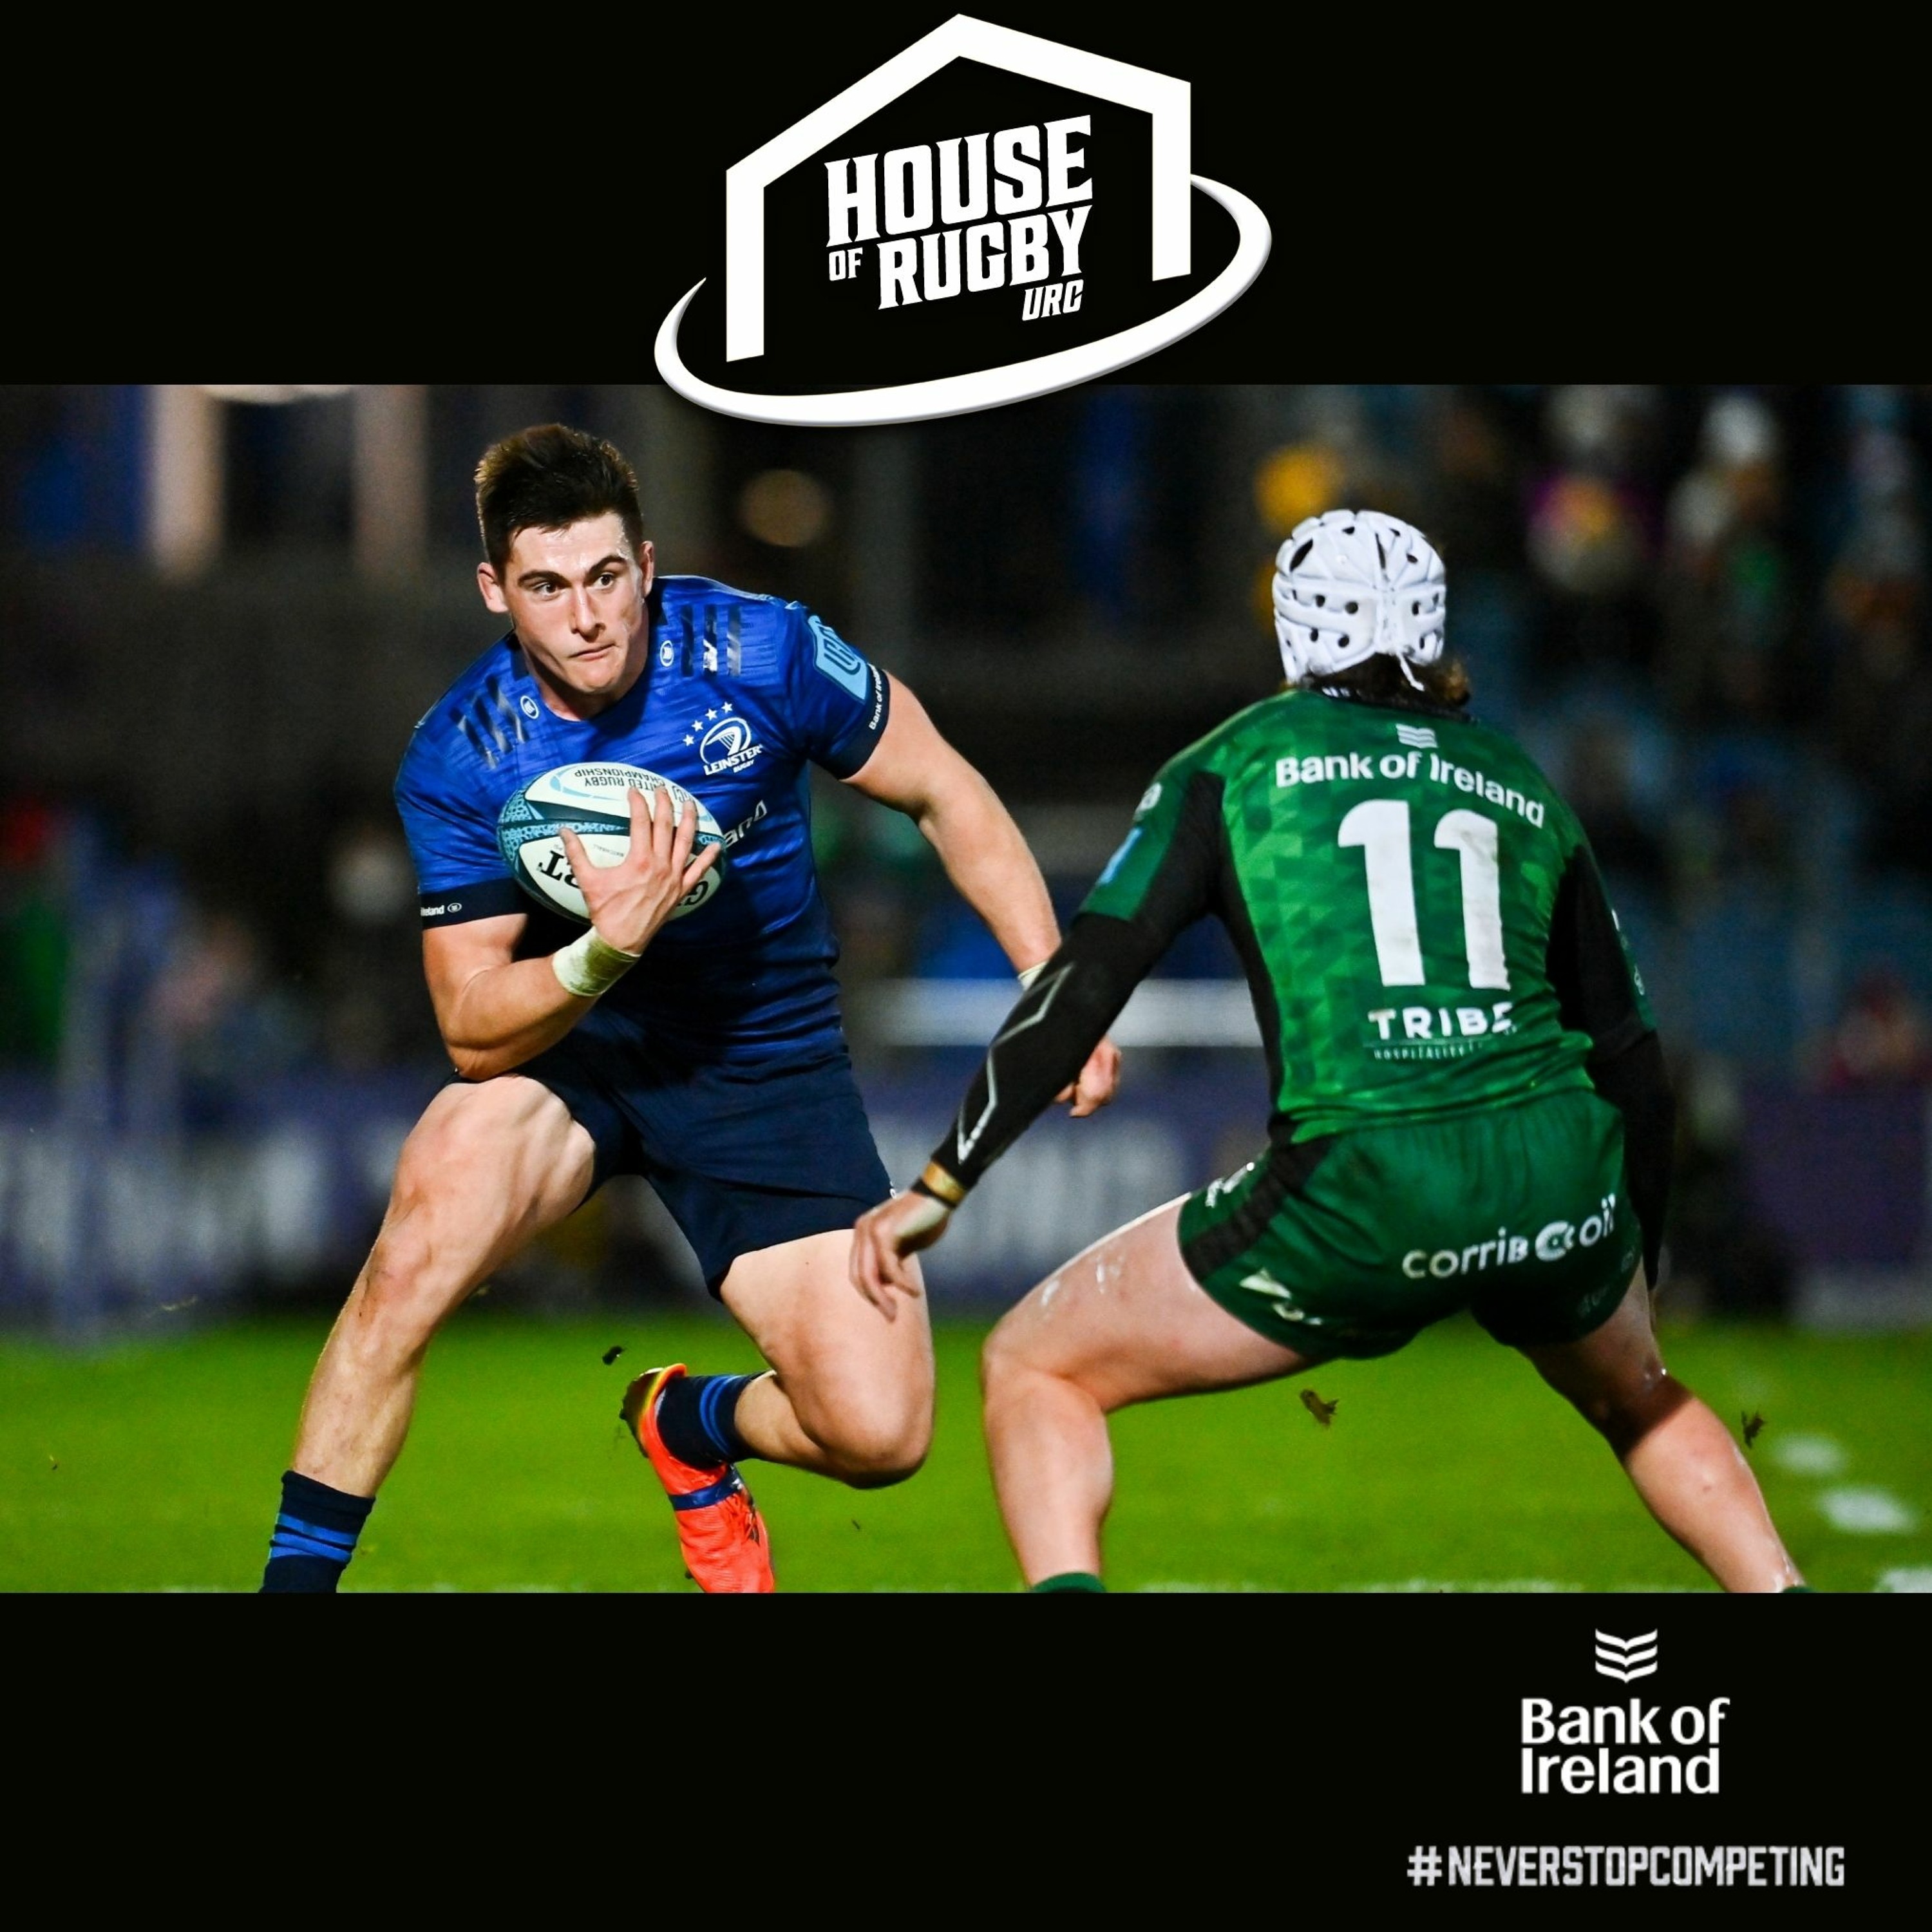 Leinster out-gun Connacht, Munster’s Champions Cup scramble and Jenny Murphy interview